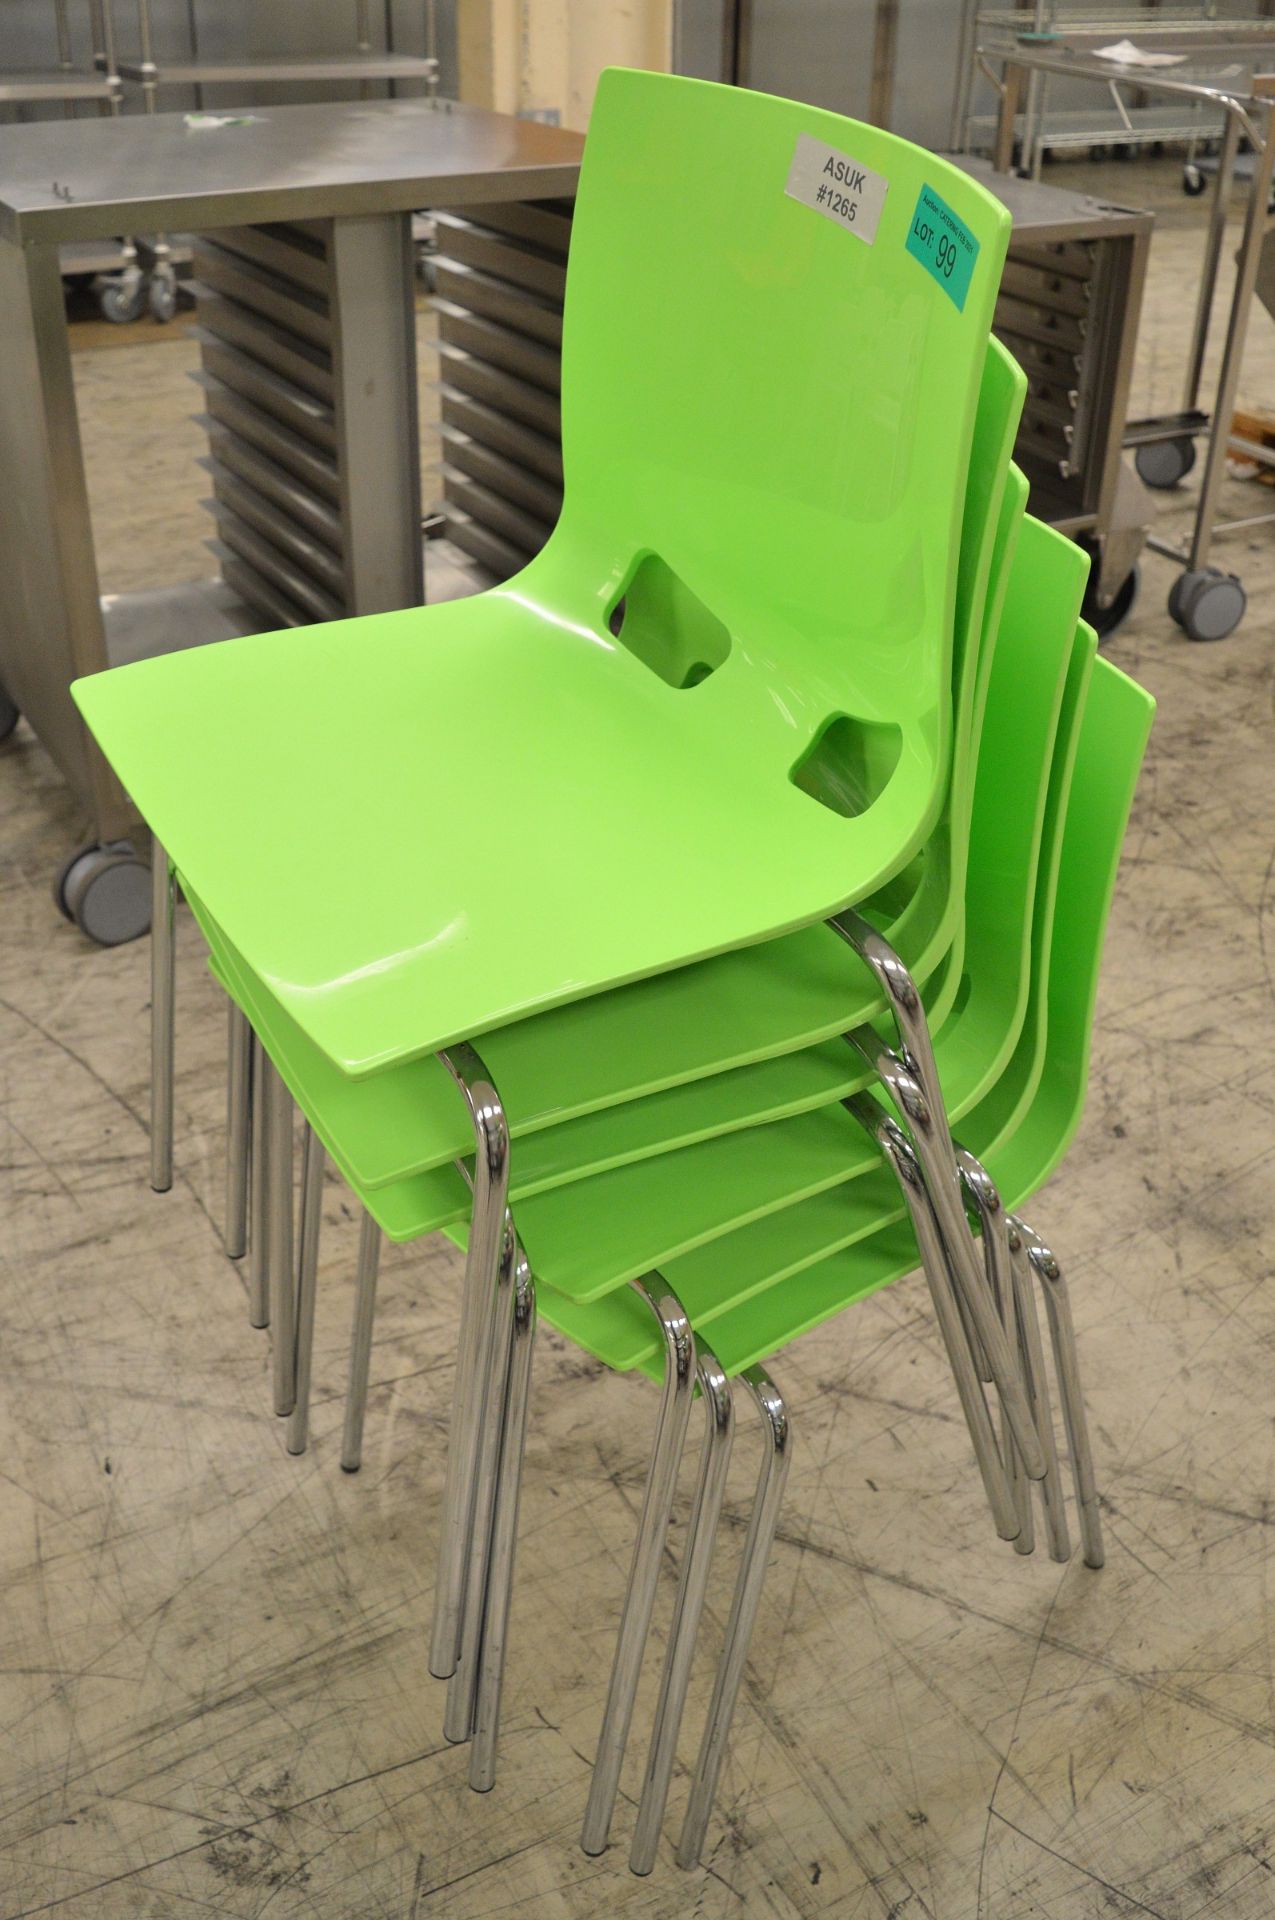 6x Plastic Chairs - Green - Image 2 of 2